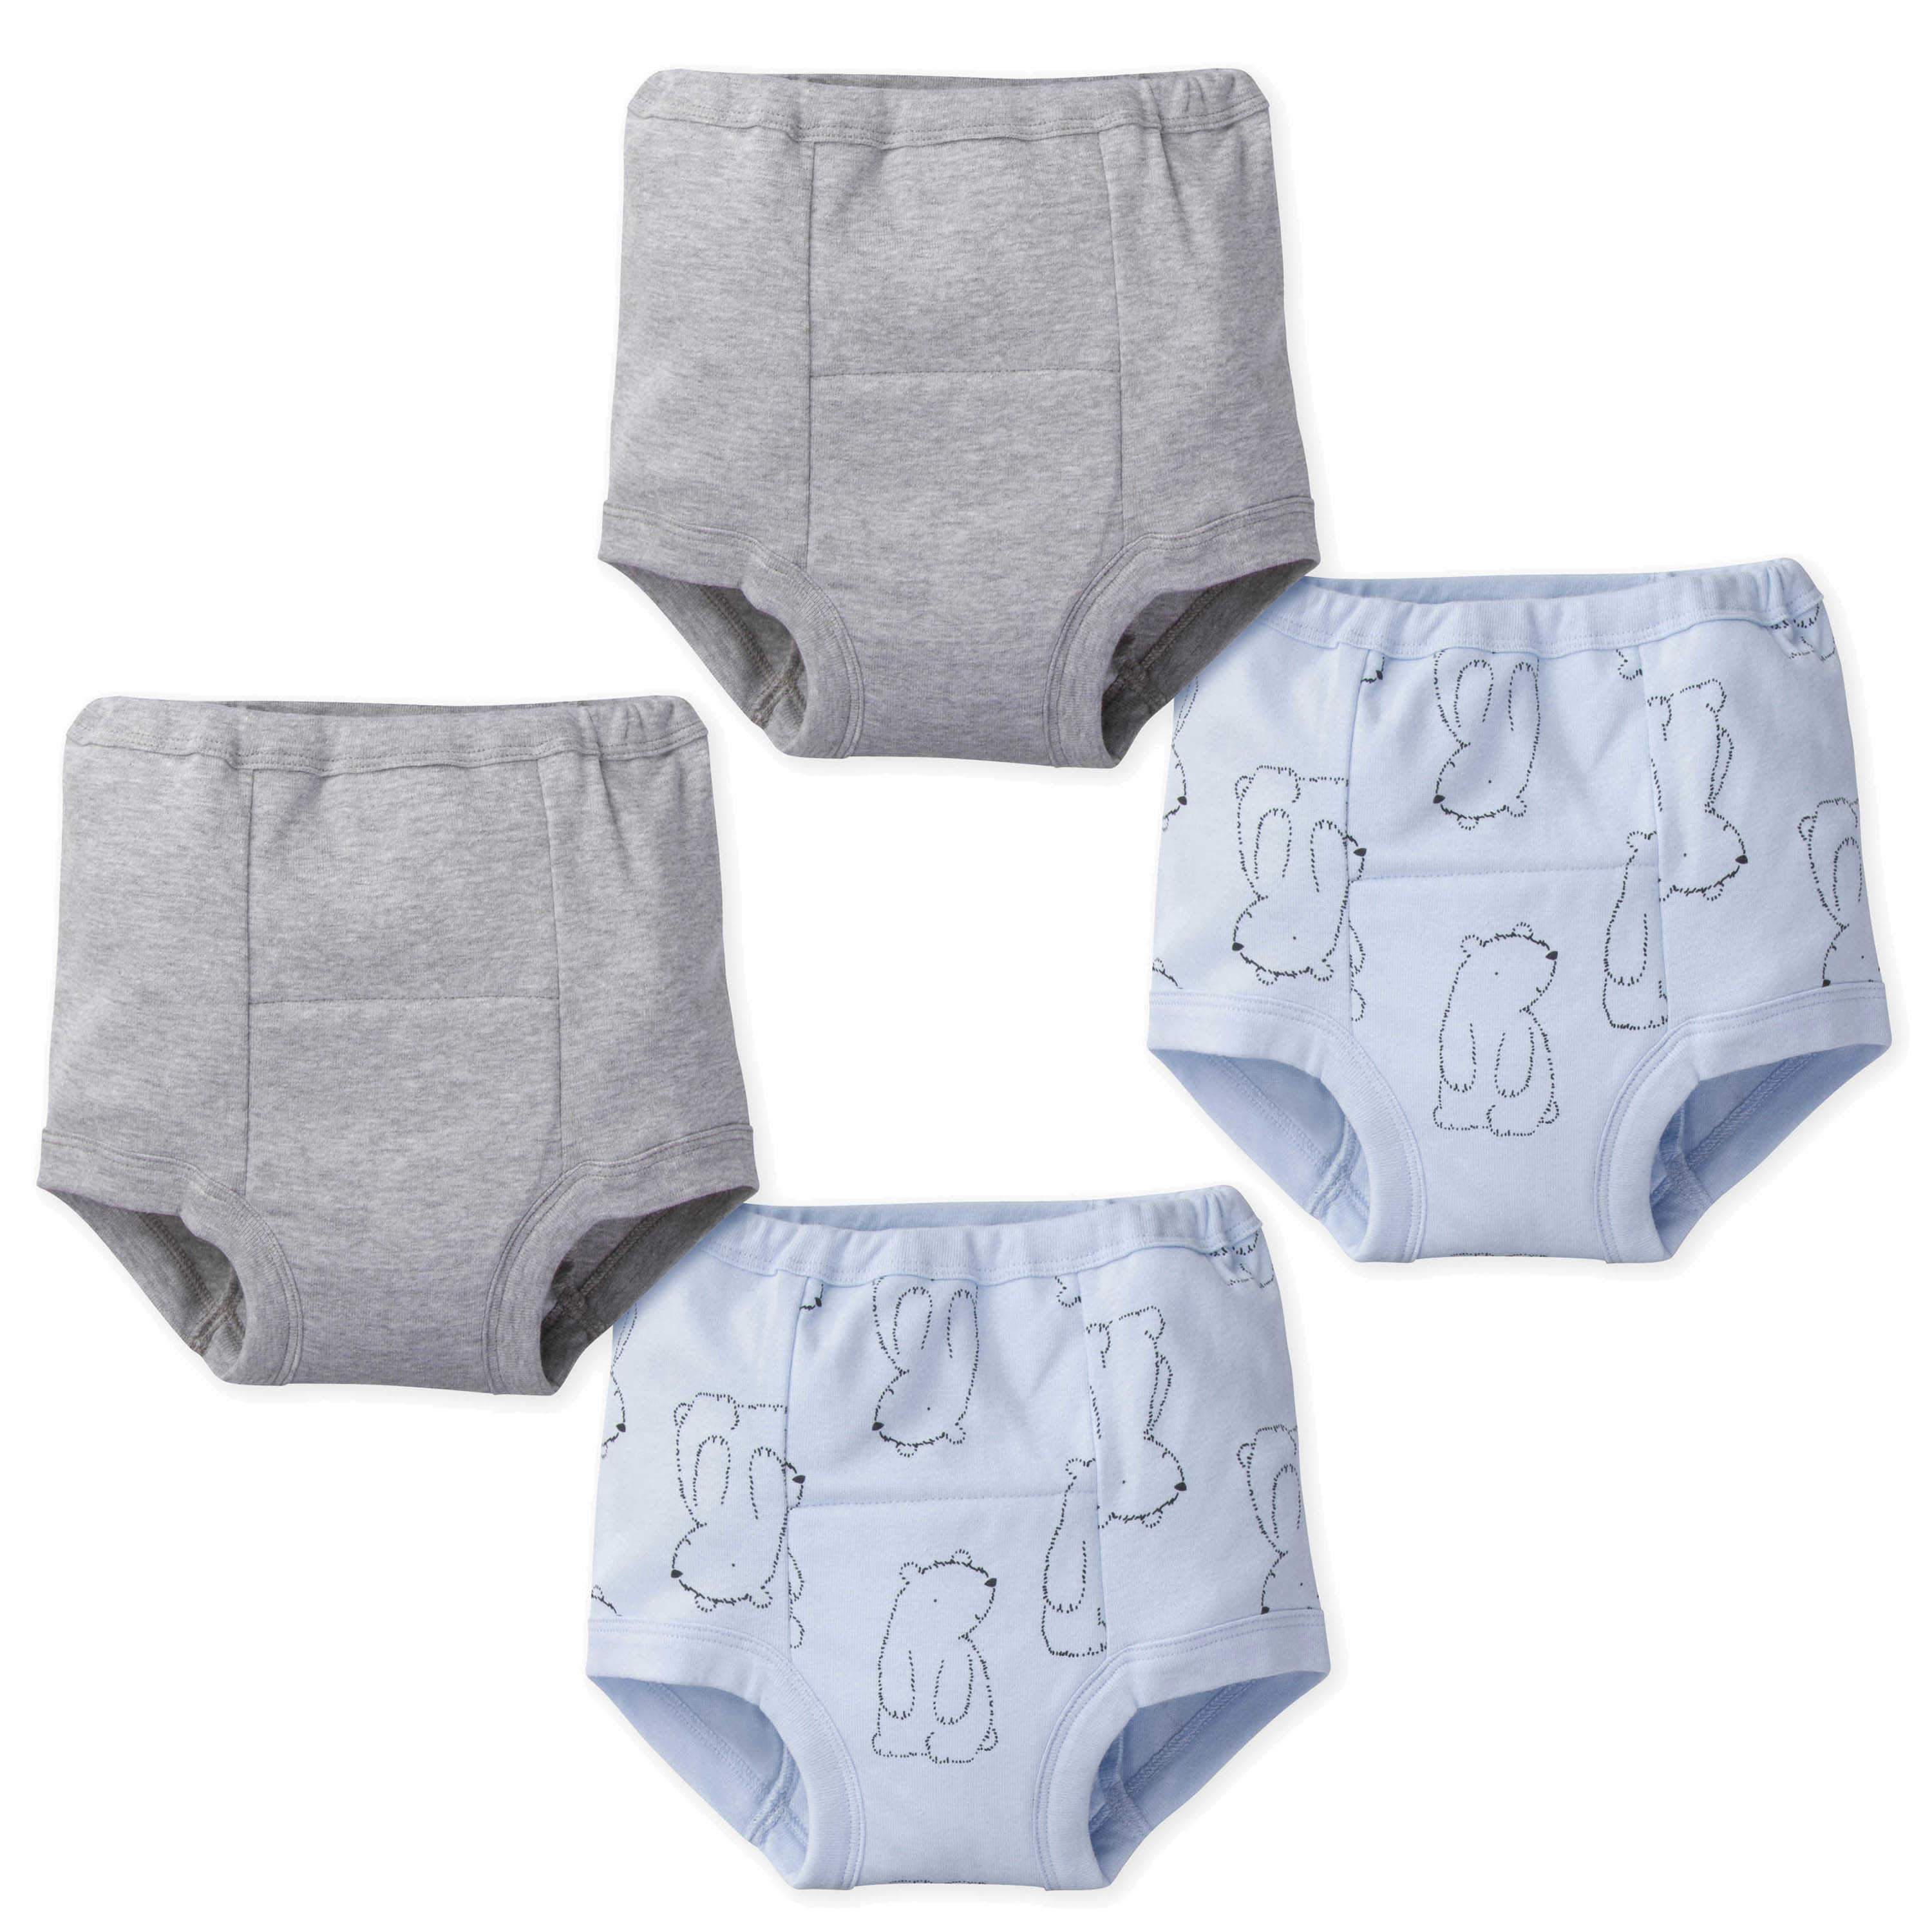 BIG ELEPHANT Baby Potty Training Pants Underwear for Girl's - 100% Cotton,  5T Colorful Flowers 5T (10 Count)